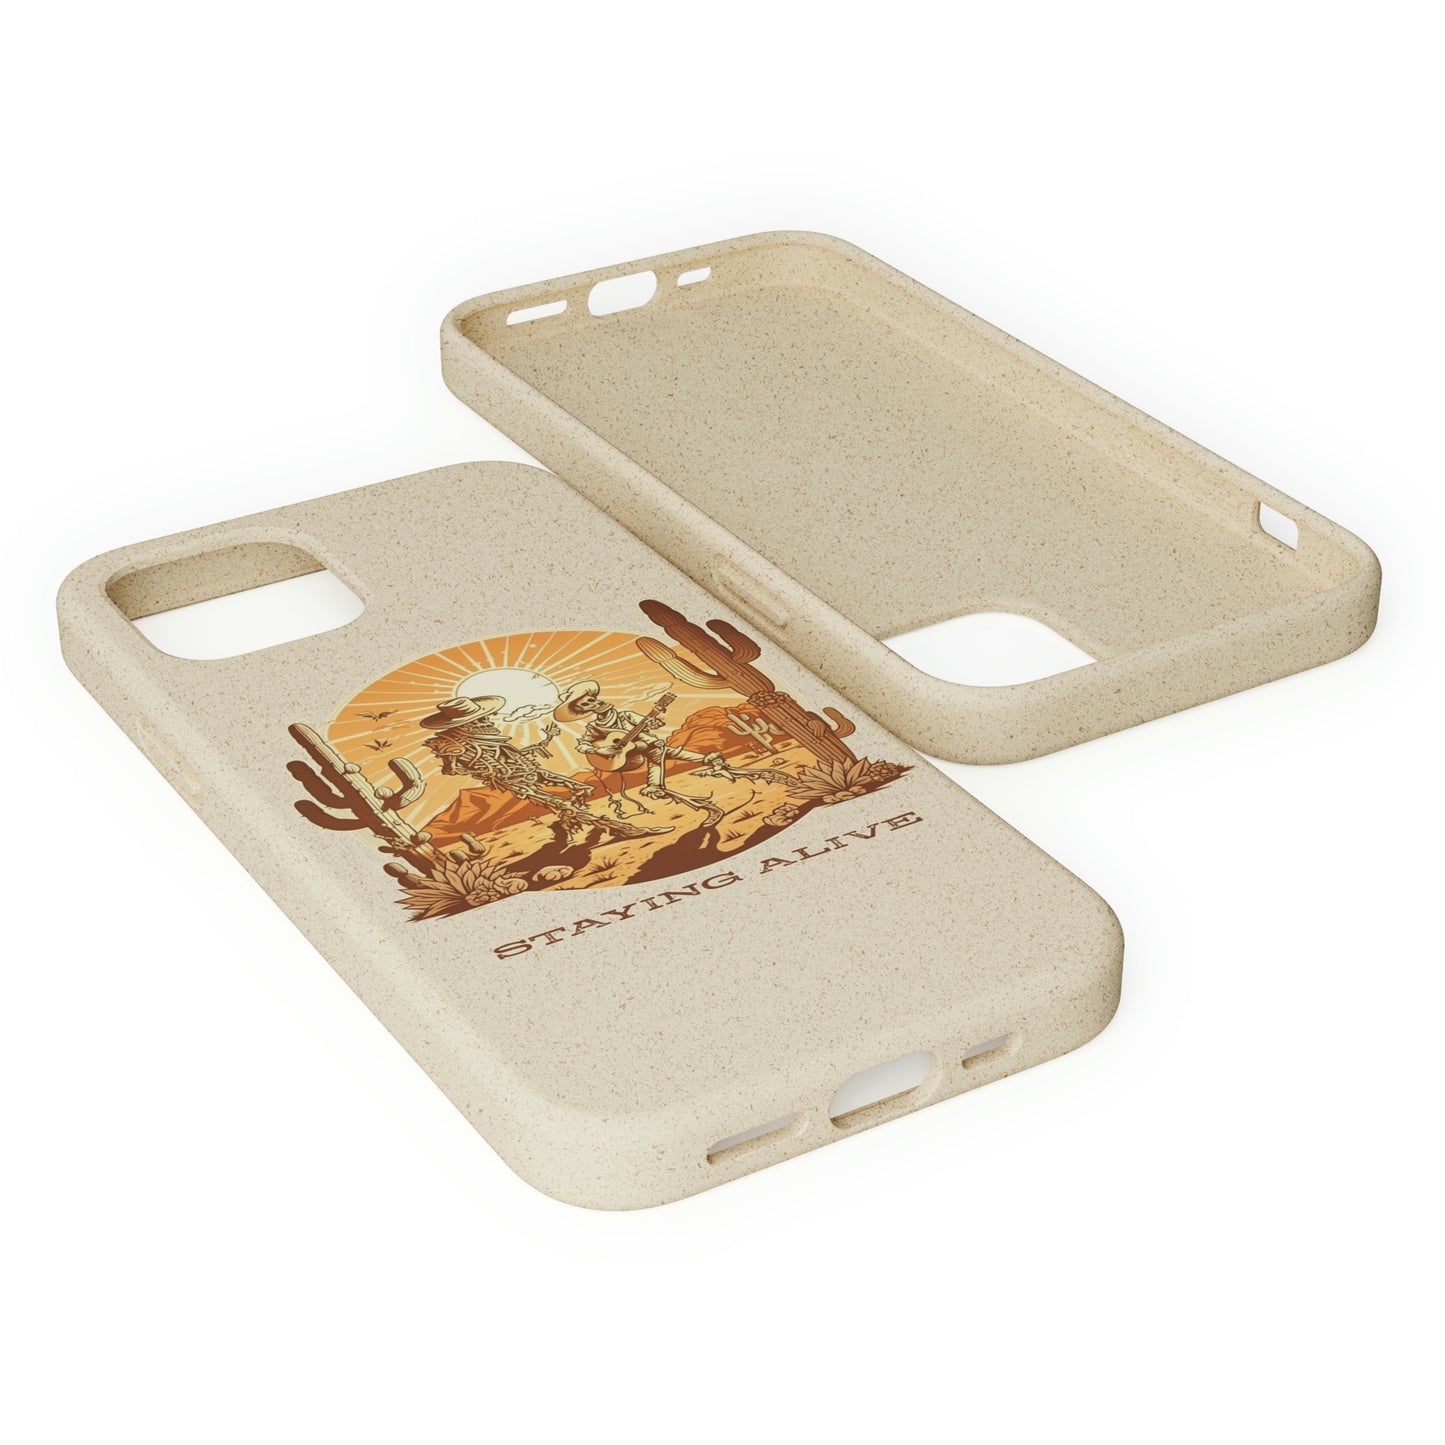 Staying Alive biodegradable phone case